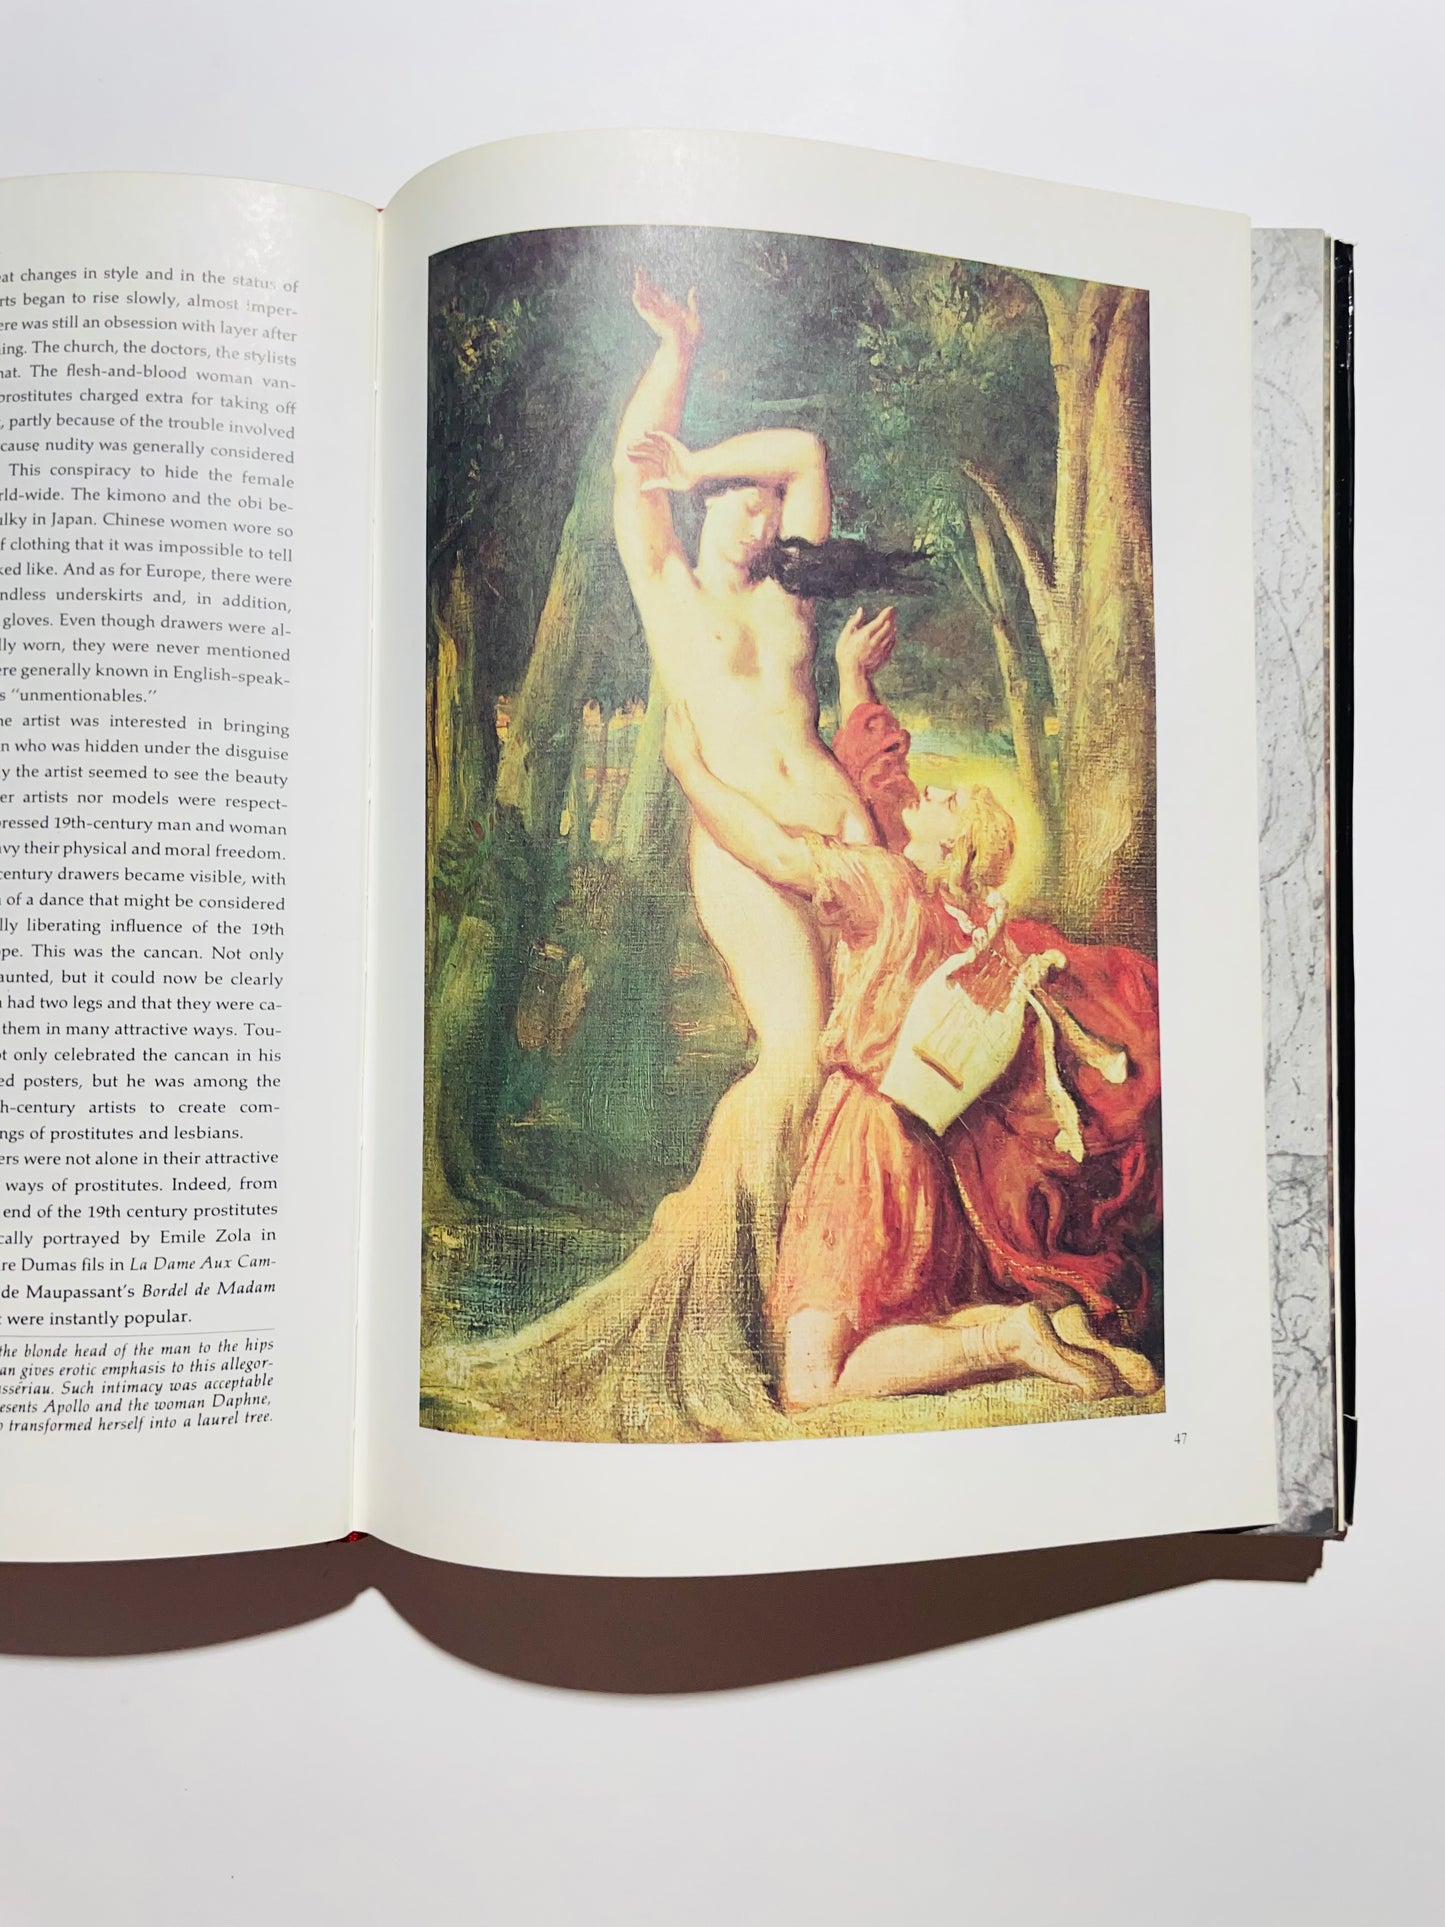 Erotic art of the masters: The 18th, 19th & 20th centuries